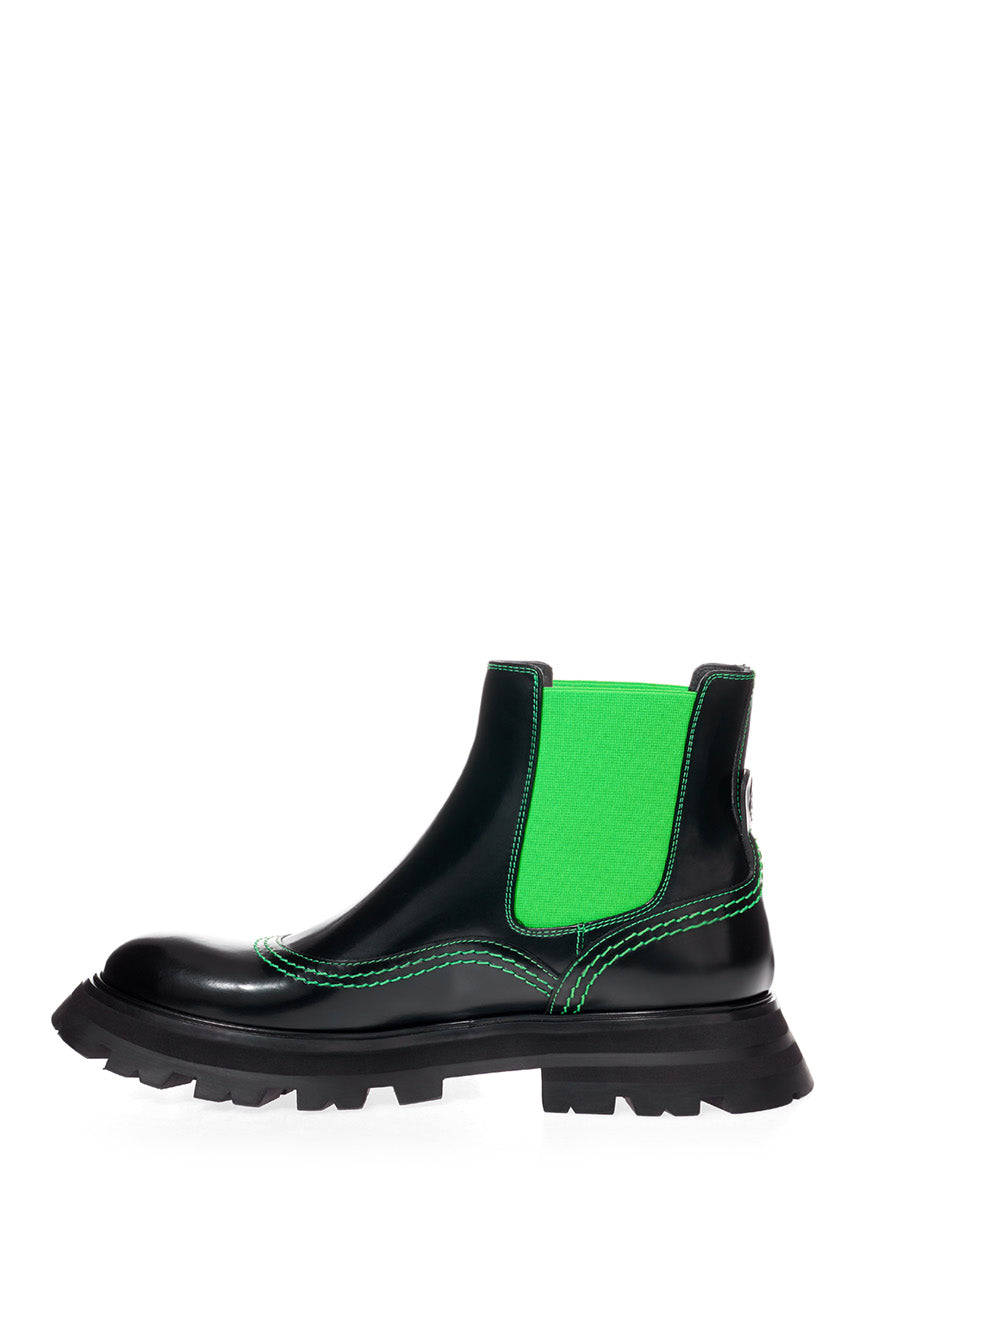 Chelsea boots with Alexander McQueen Fluo inserts